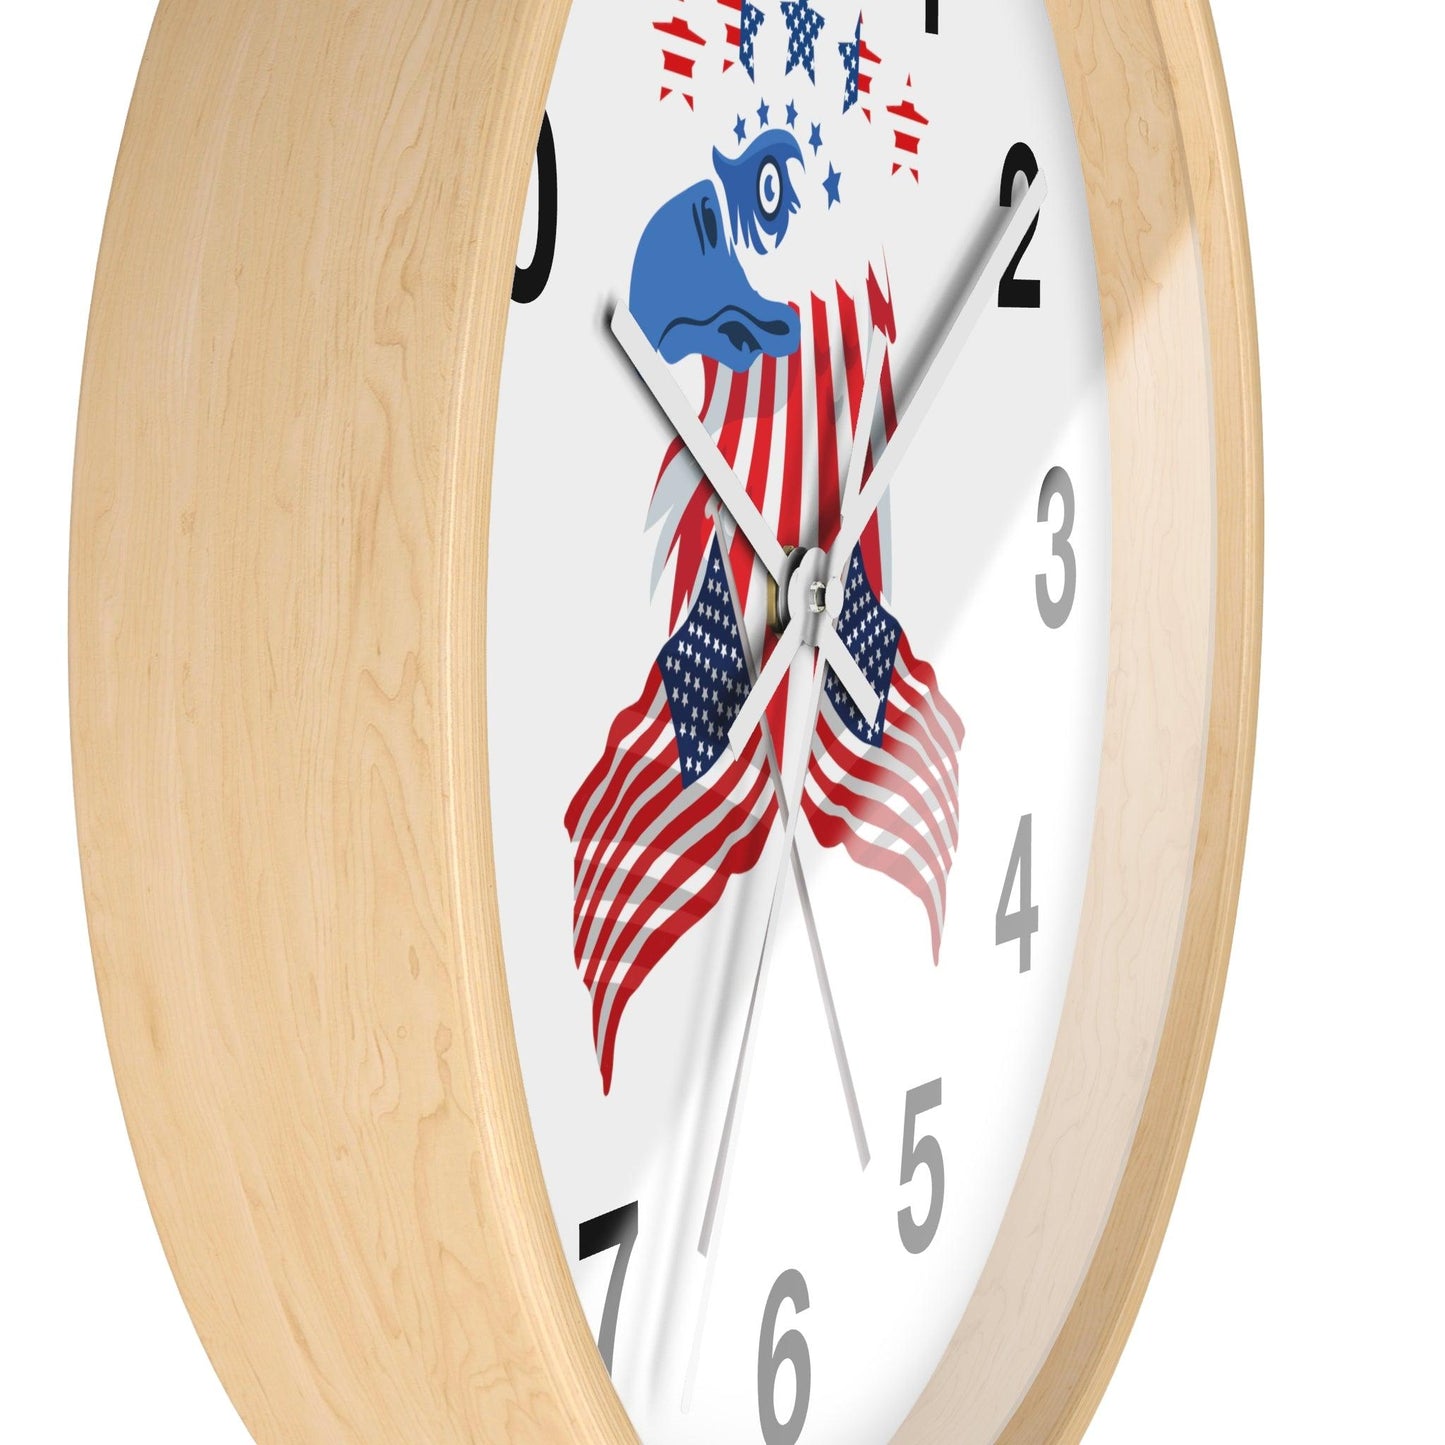 USA Flag Wall Clock, Home decor gift, House Warming gift, New Home Gift, Patriotic Gift School Clock Home Clock Office Clock